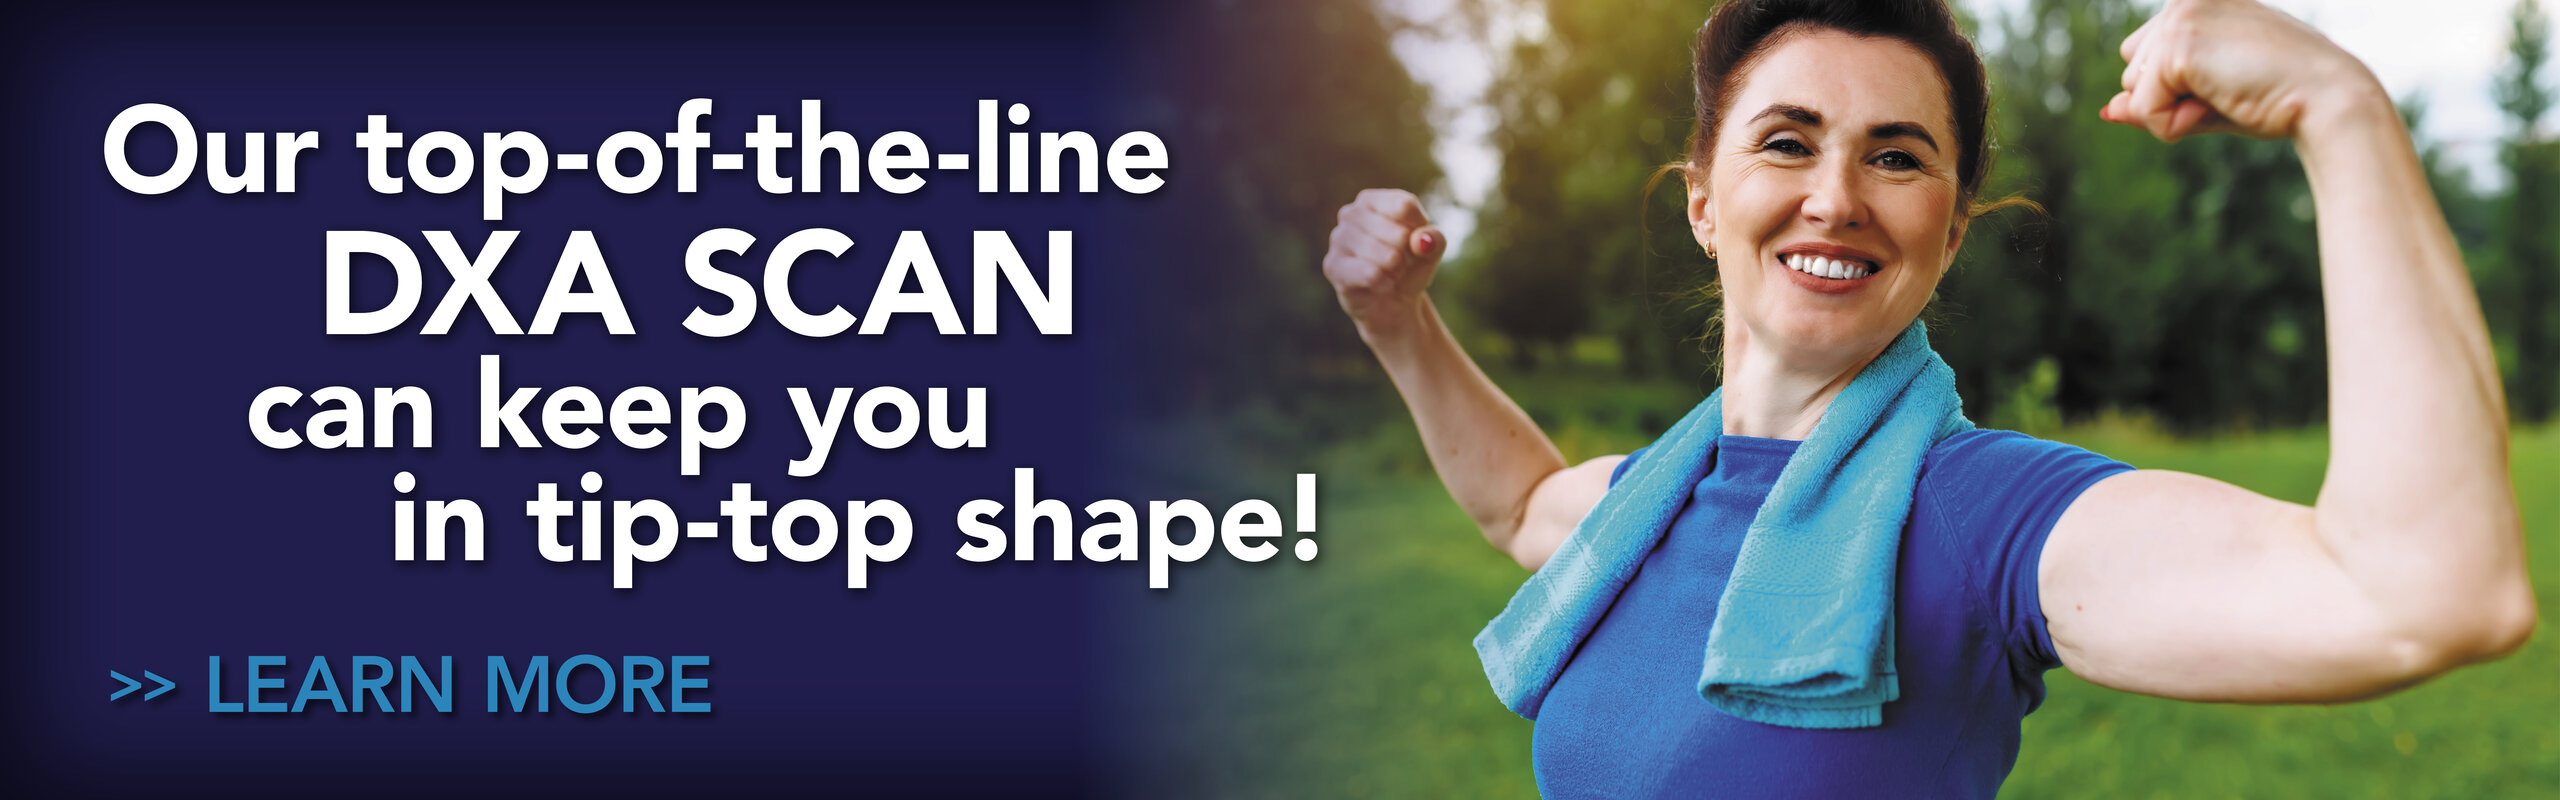 Our top-of-the-line DXA Scan can keep you in tip=top shape!

Learn more.